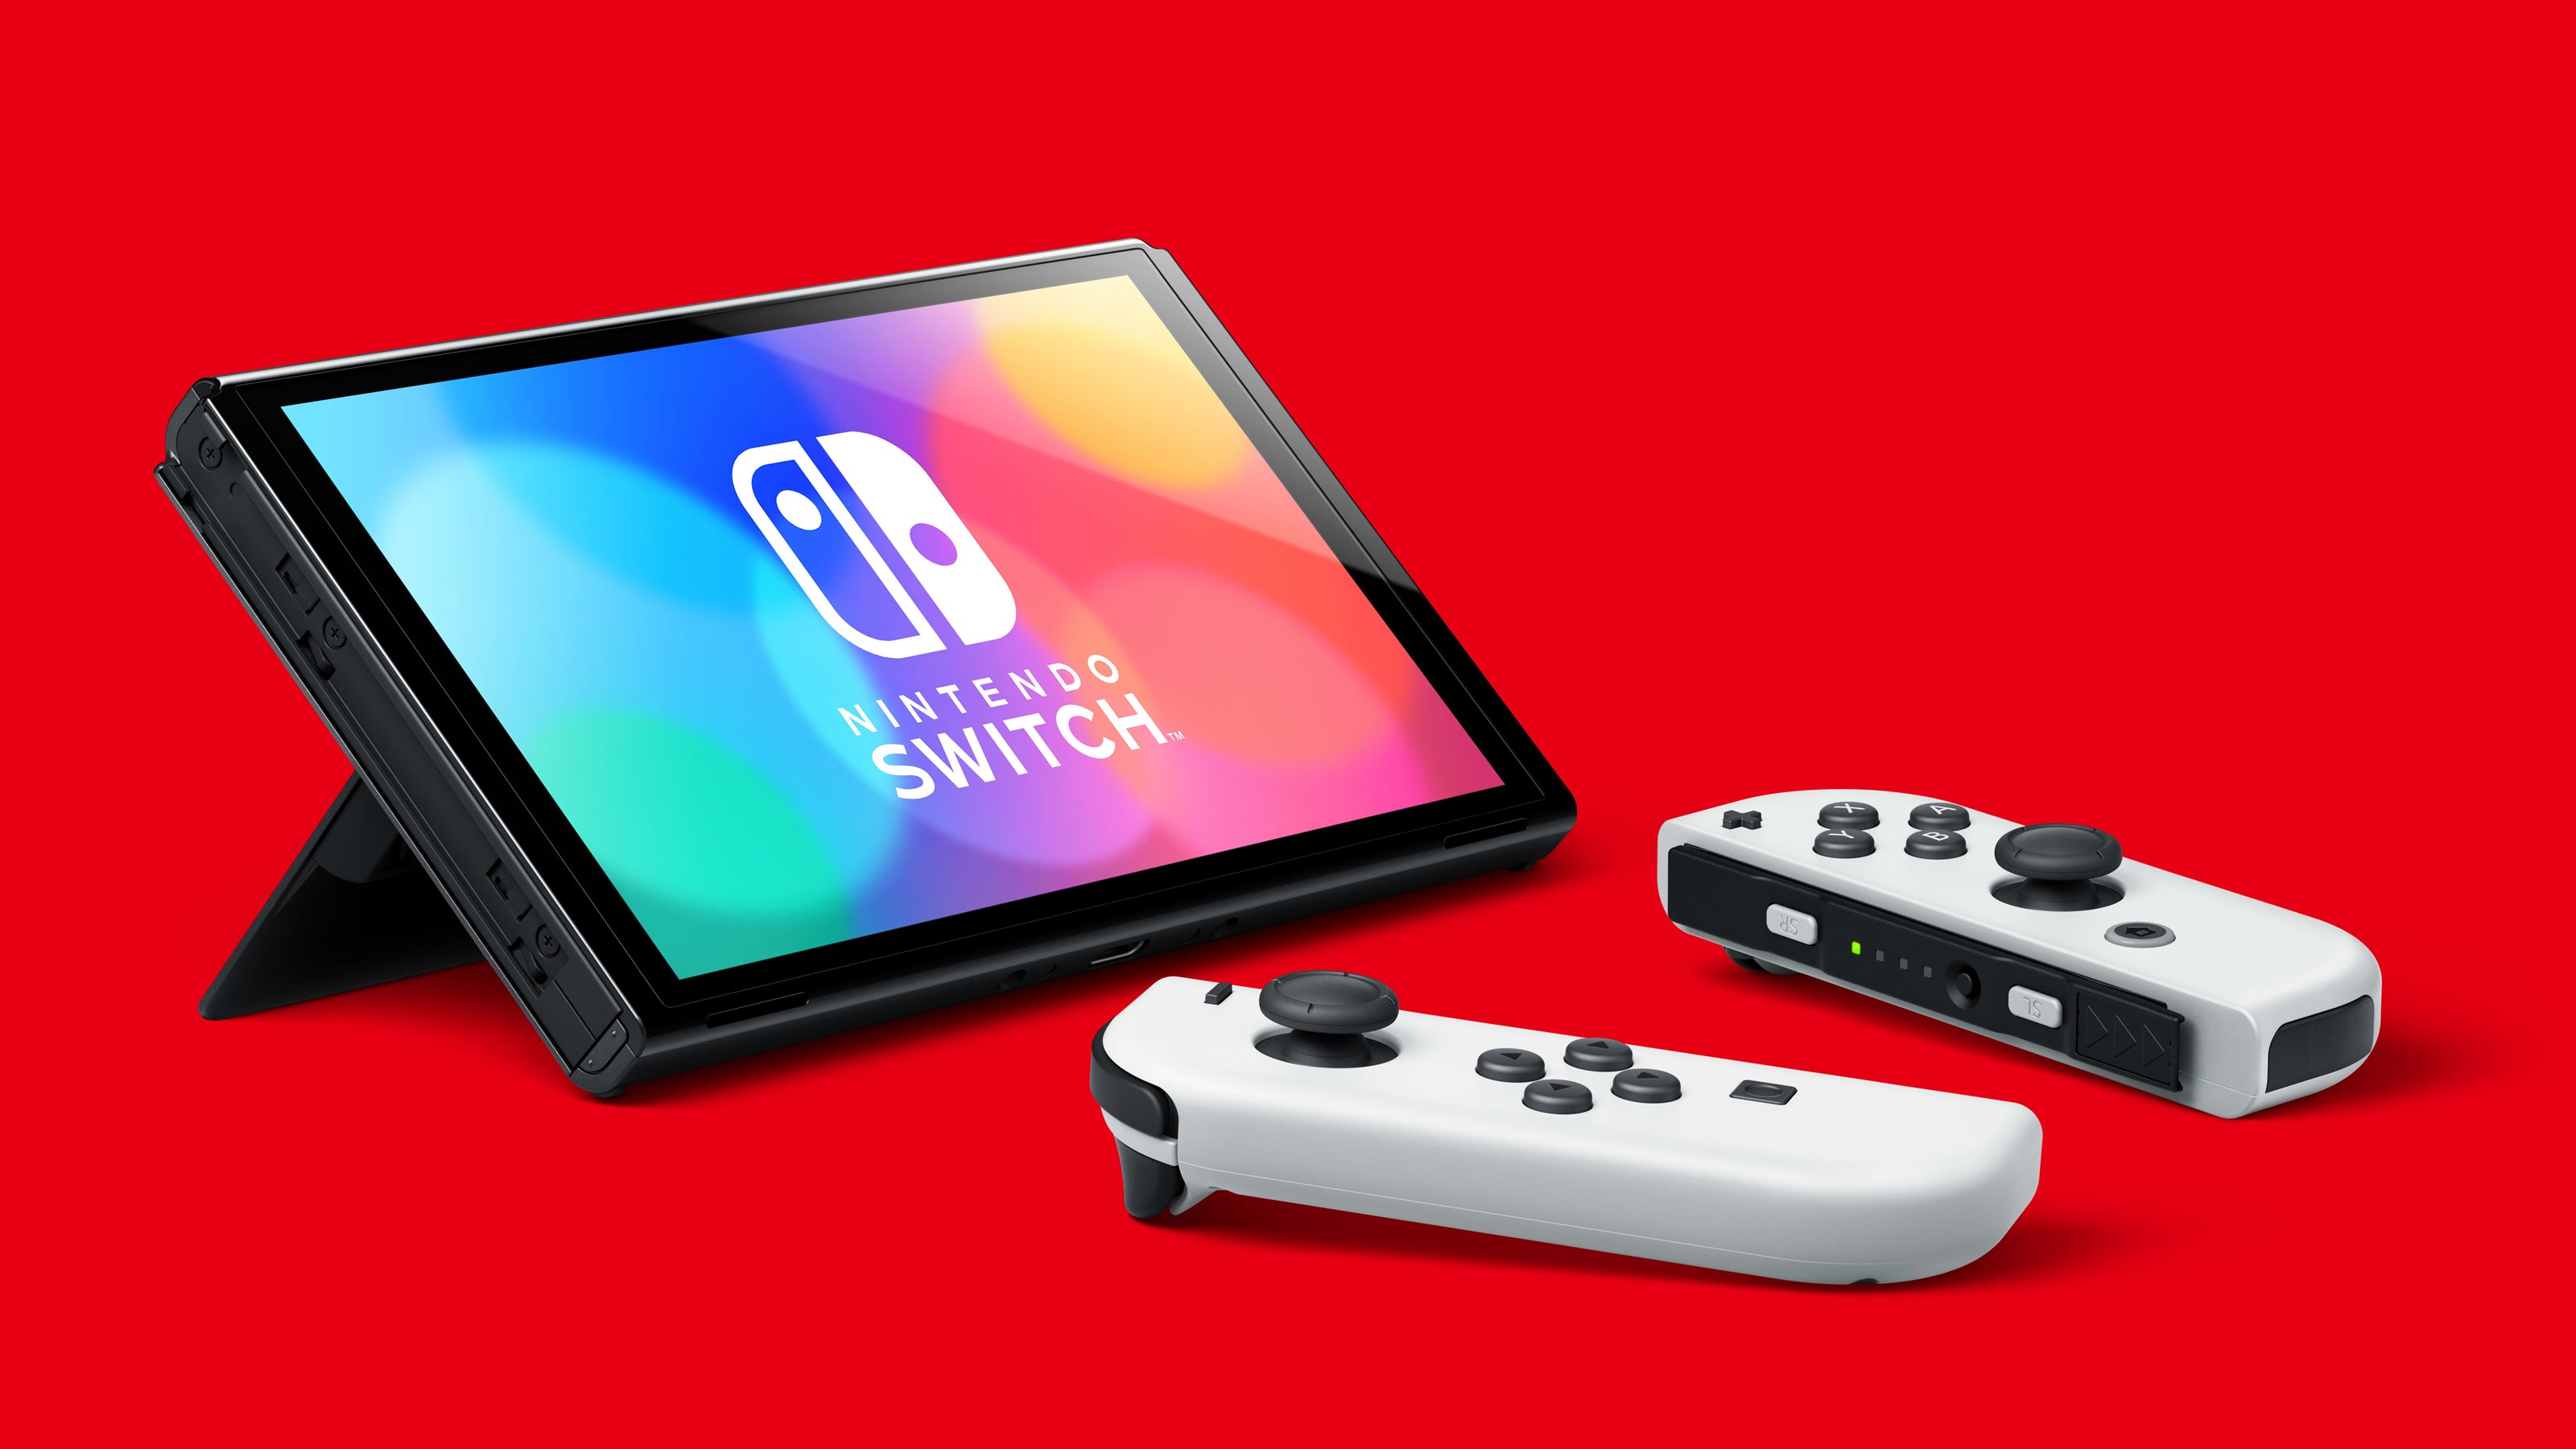 Image for Switch is Nintendo's best-selling home console with over 114 million units sold lifetime